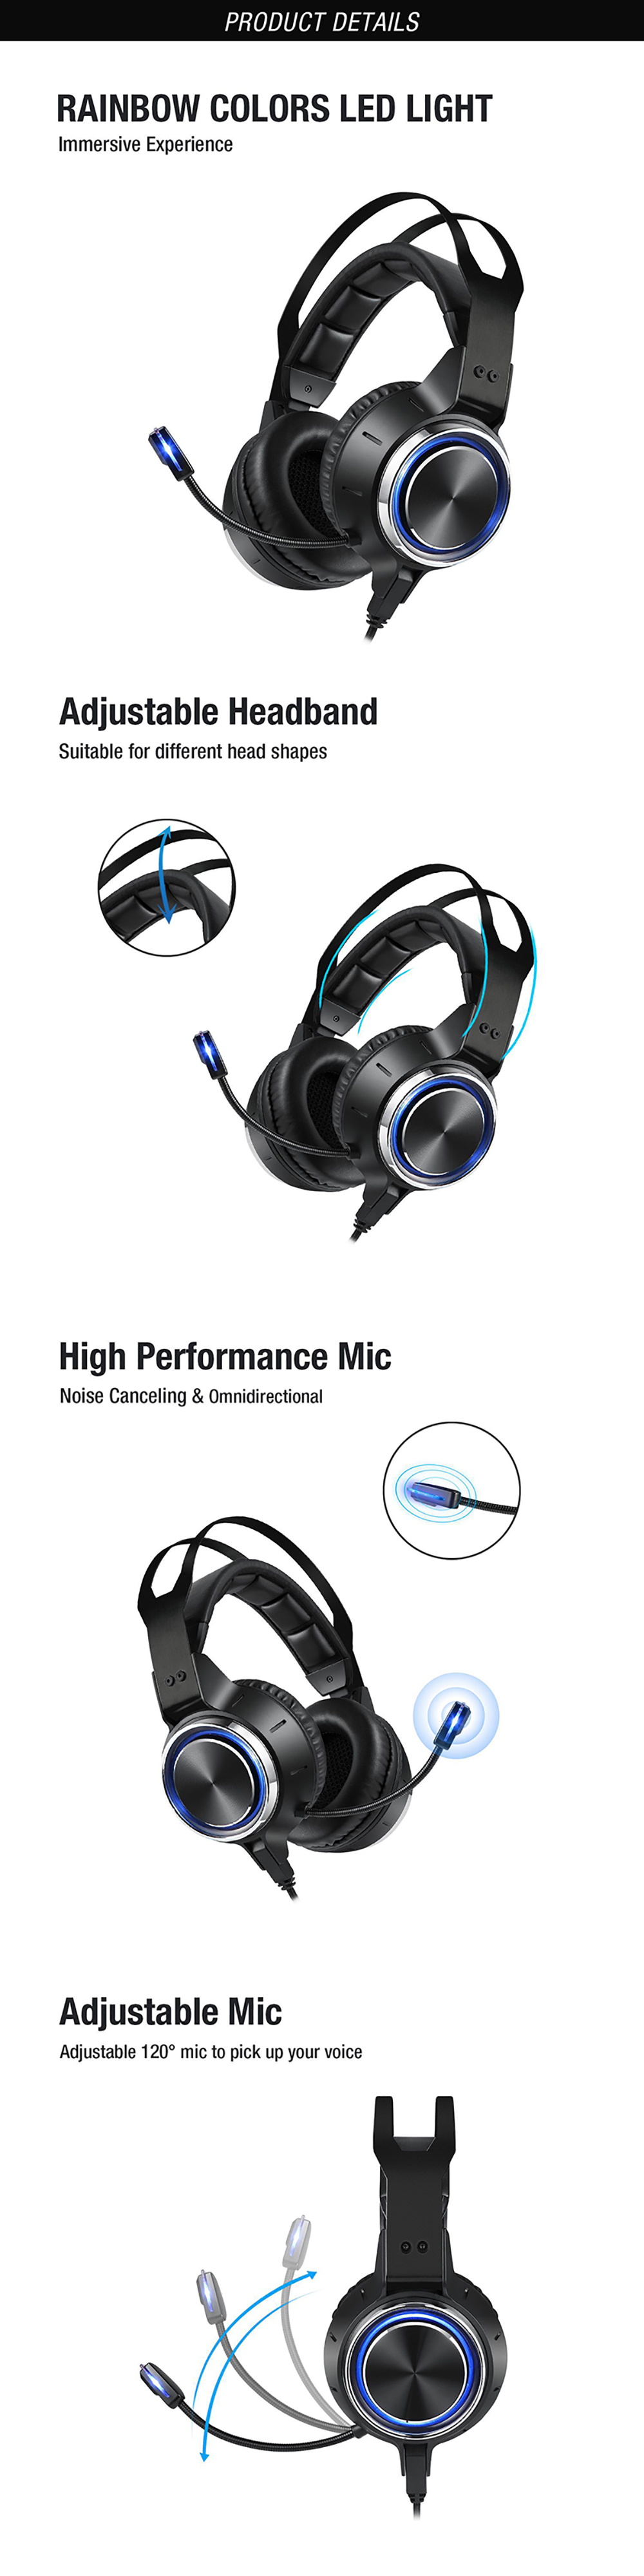 K15-Gaming-Headset-50mm-Unit-RGB-Rainbow-Colors-Noise-Canceling-0mnidirectional-Mic-Line-Control-for-1829496-3